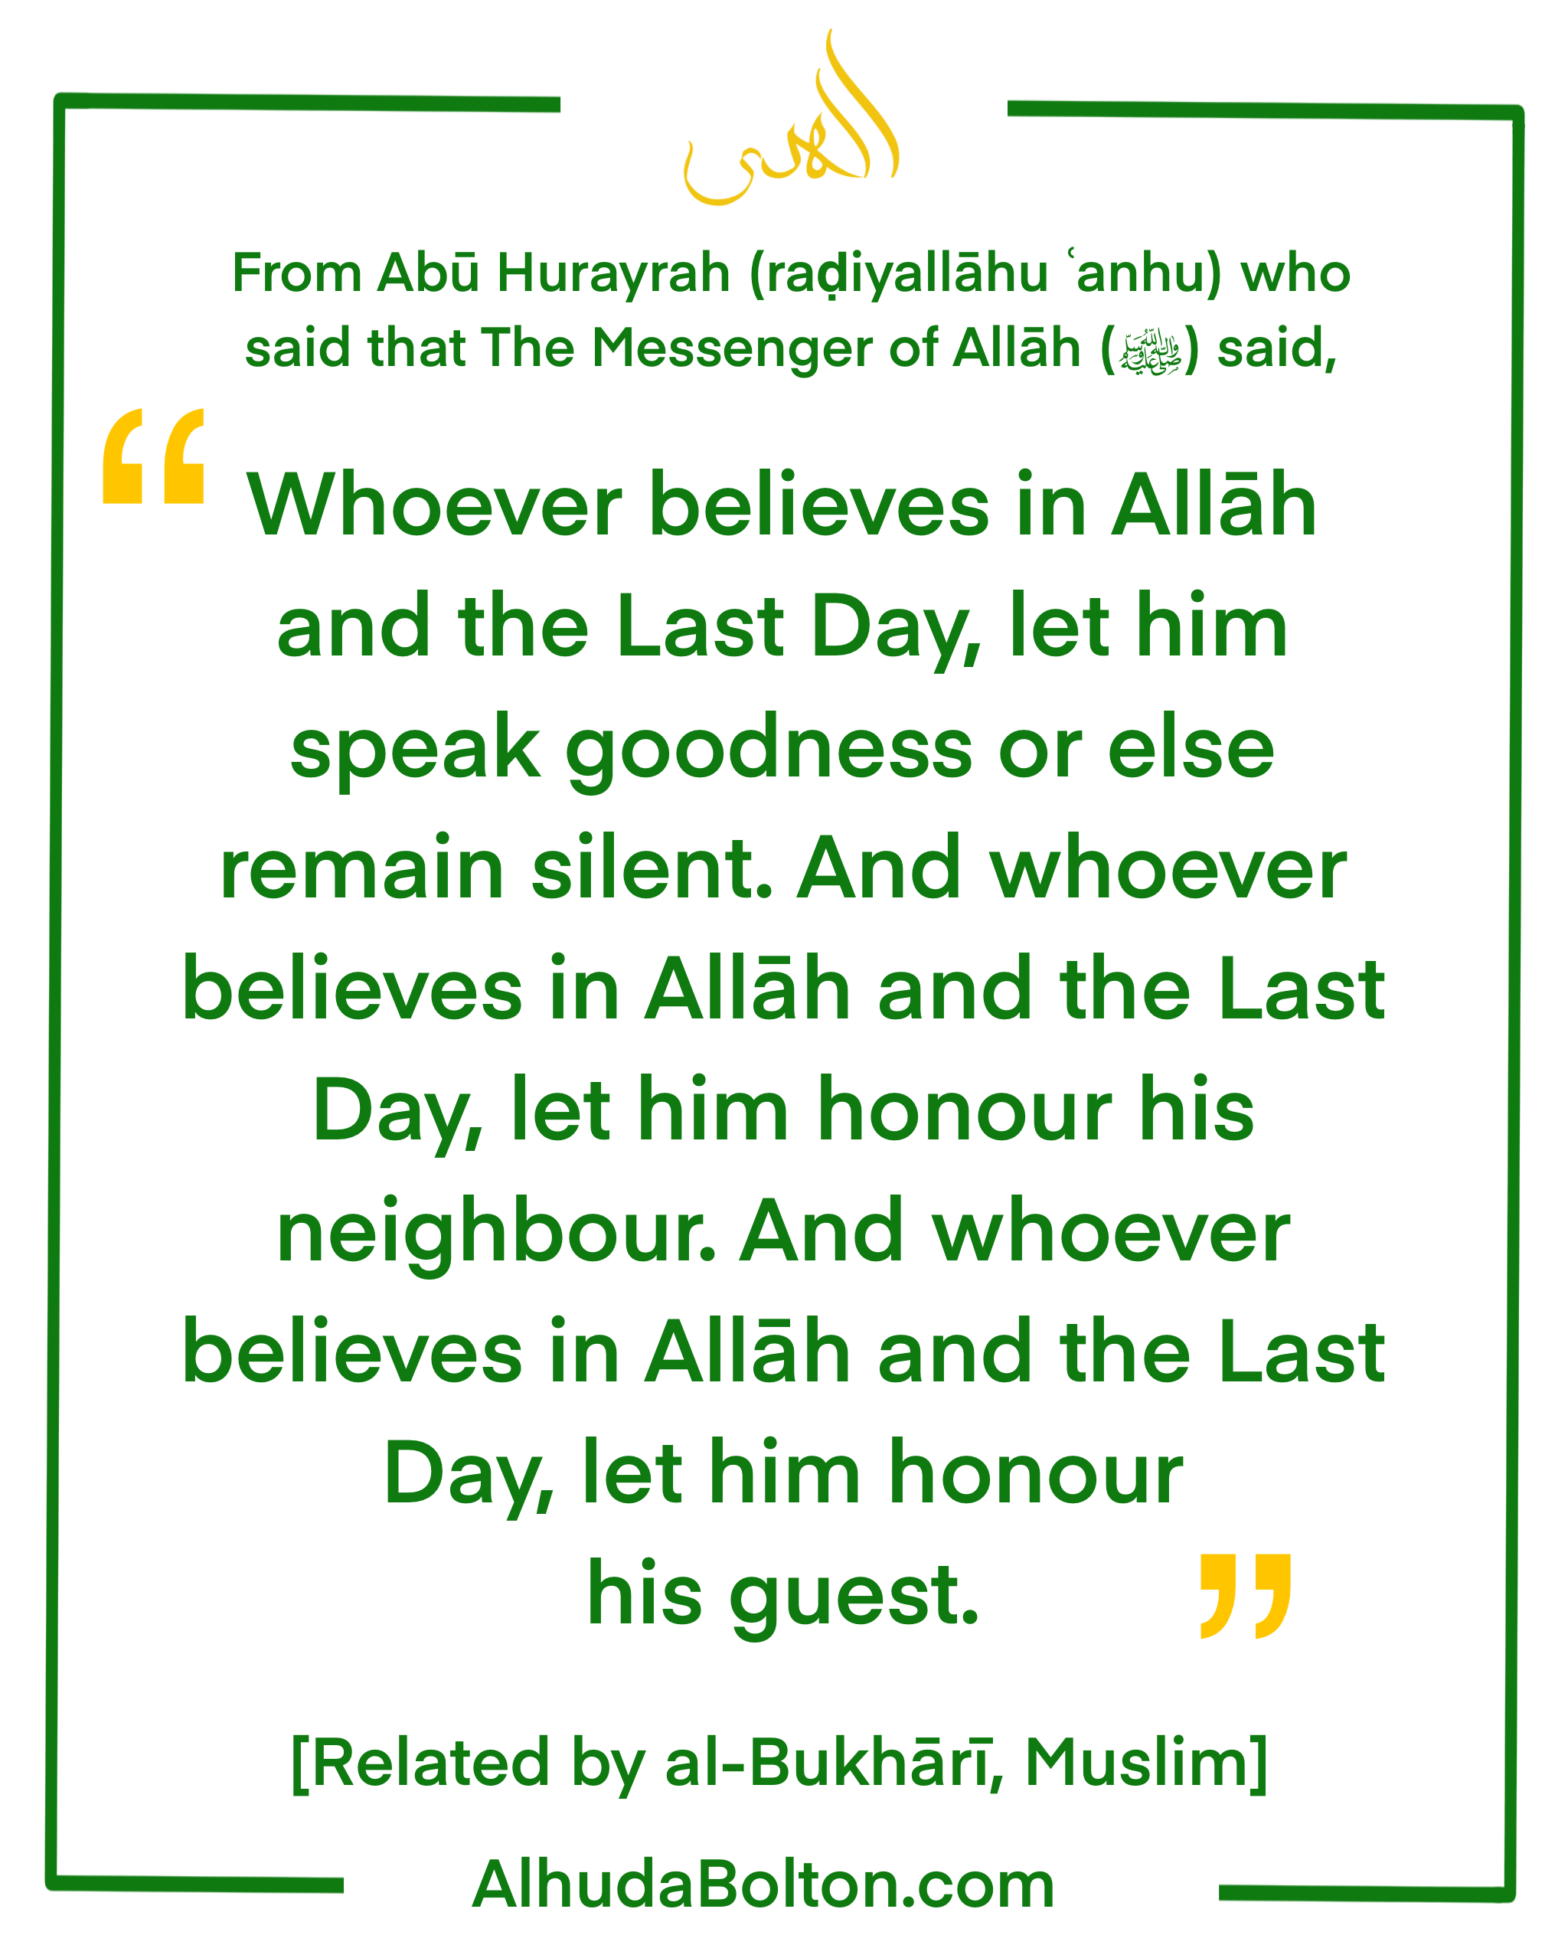 Weekly Hadith: Honouring the Guest